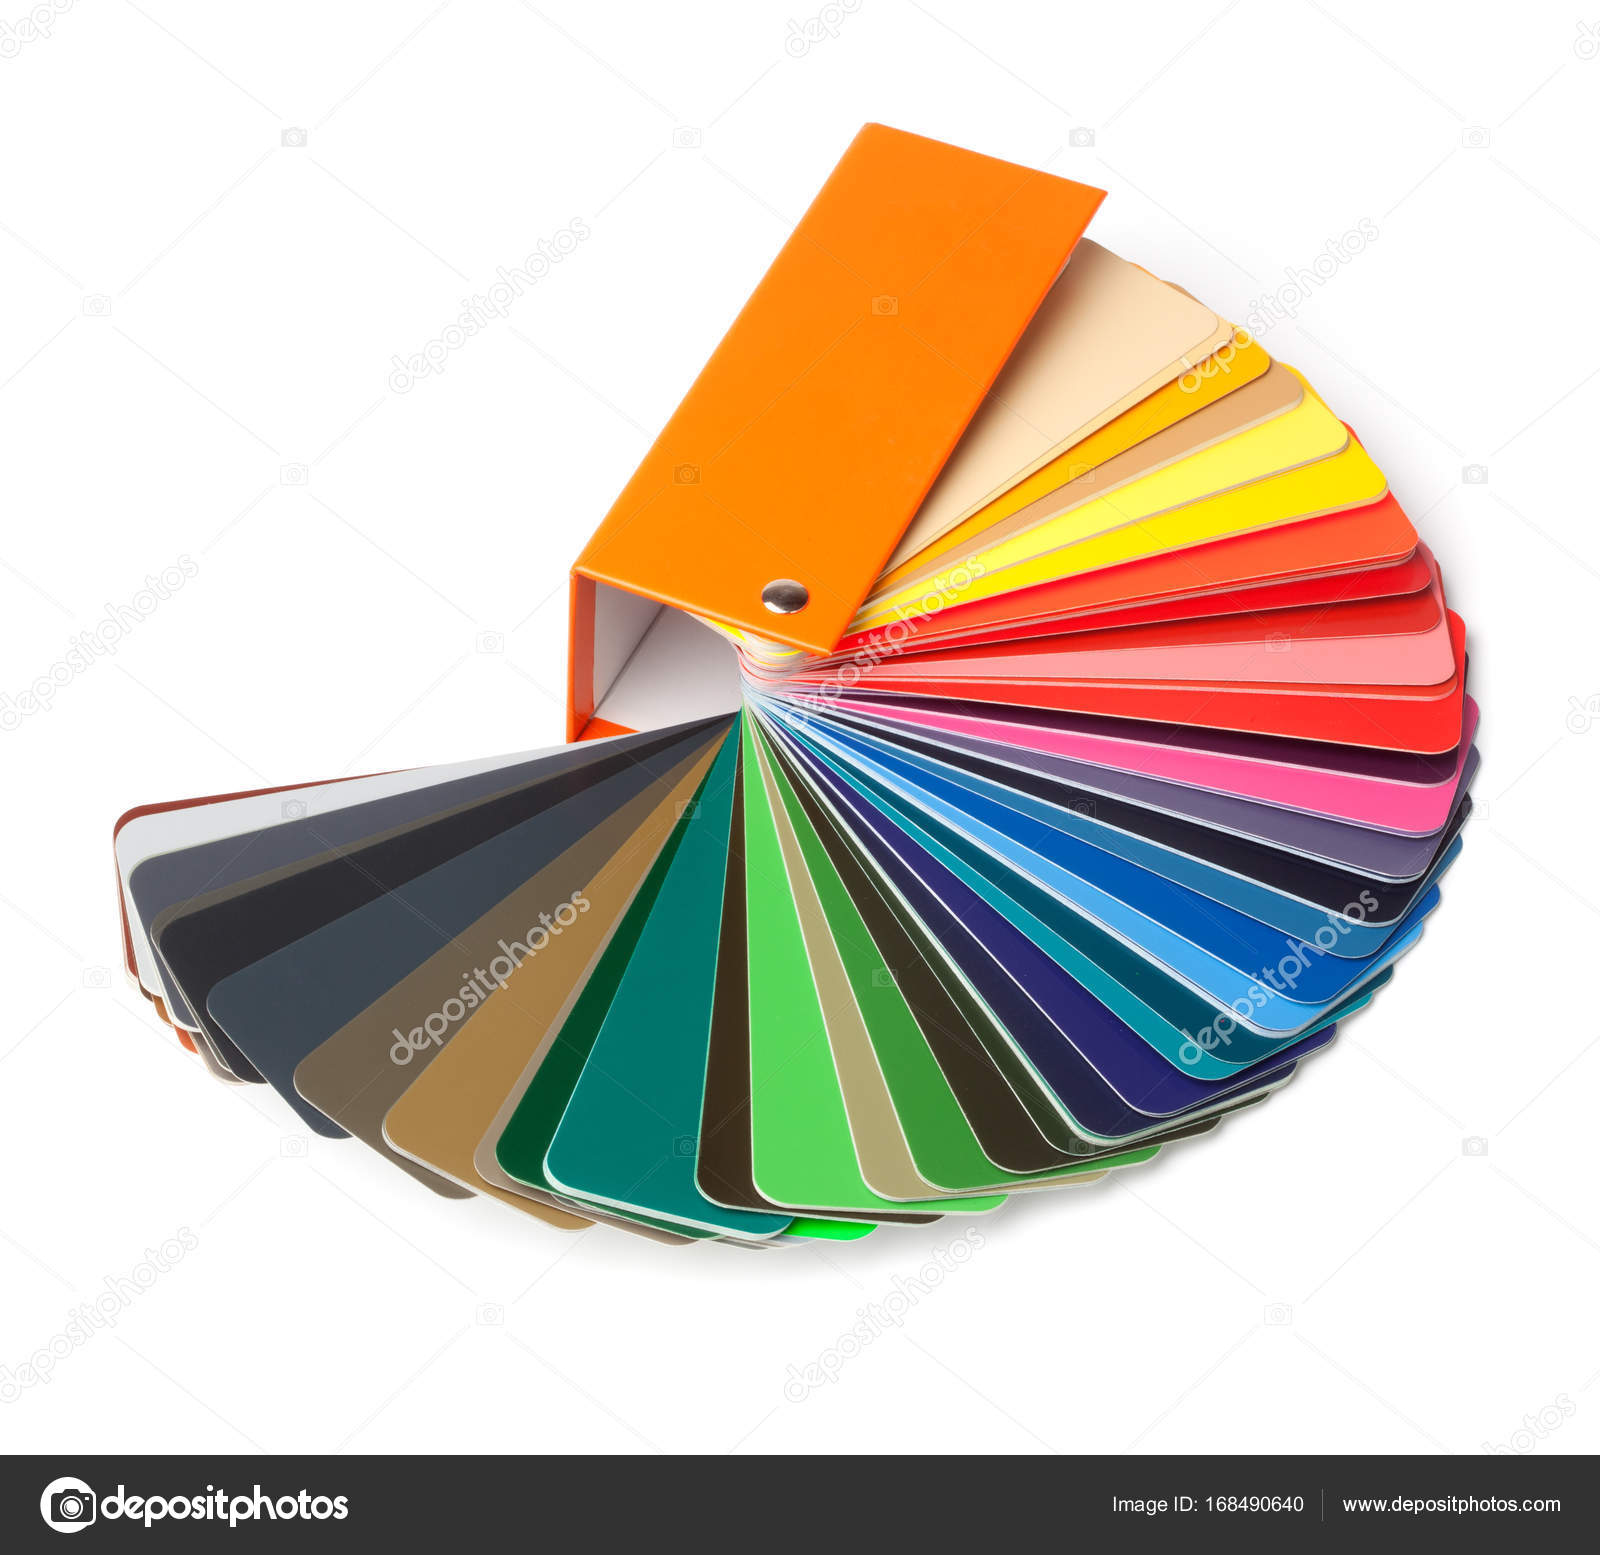 Colour Fan or Chart spread out, Isolated on White Background Stock Photo by  ©mvancaspel 168490640